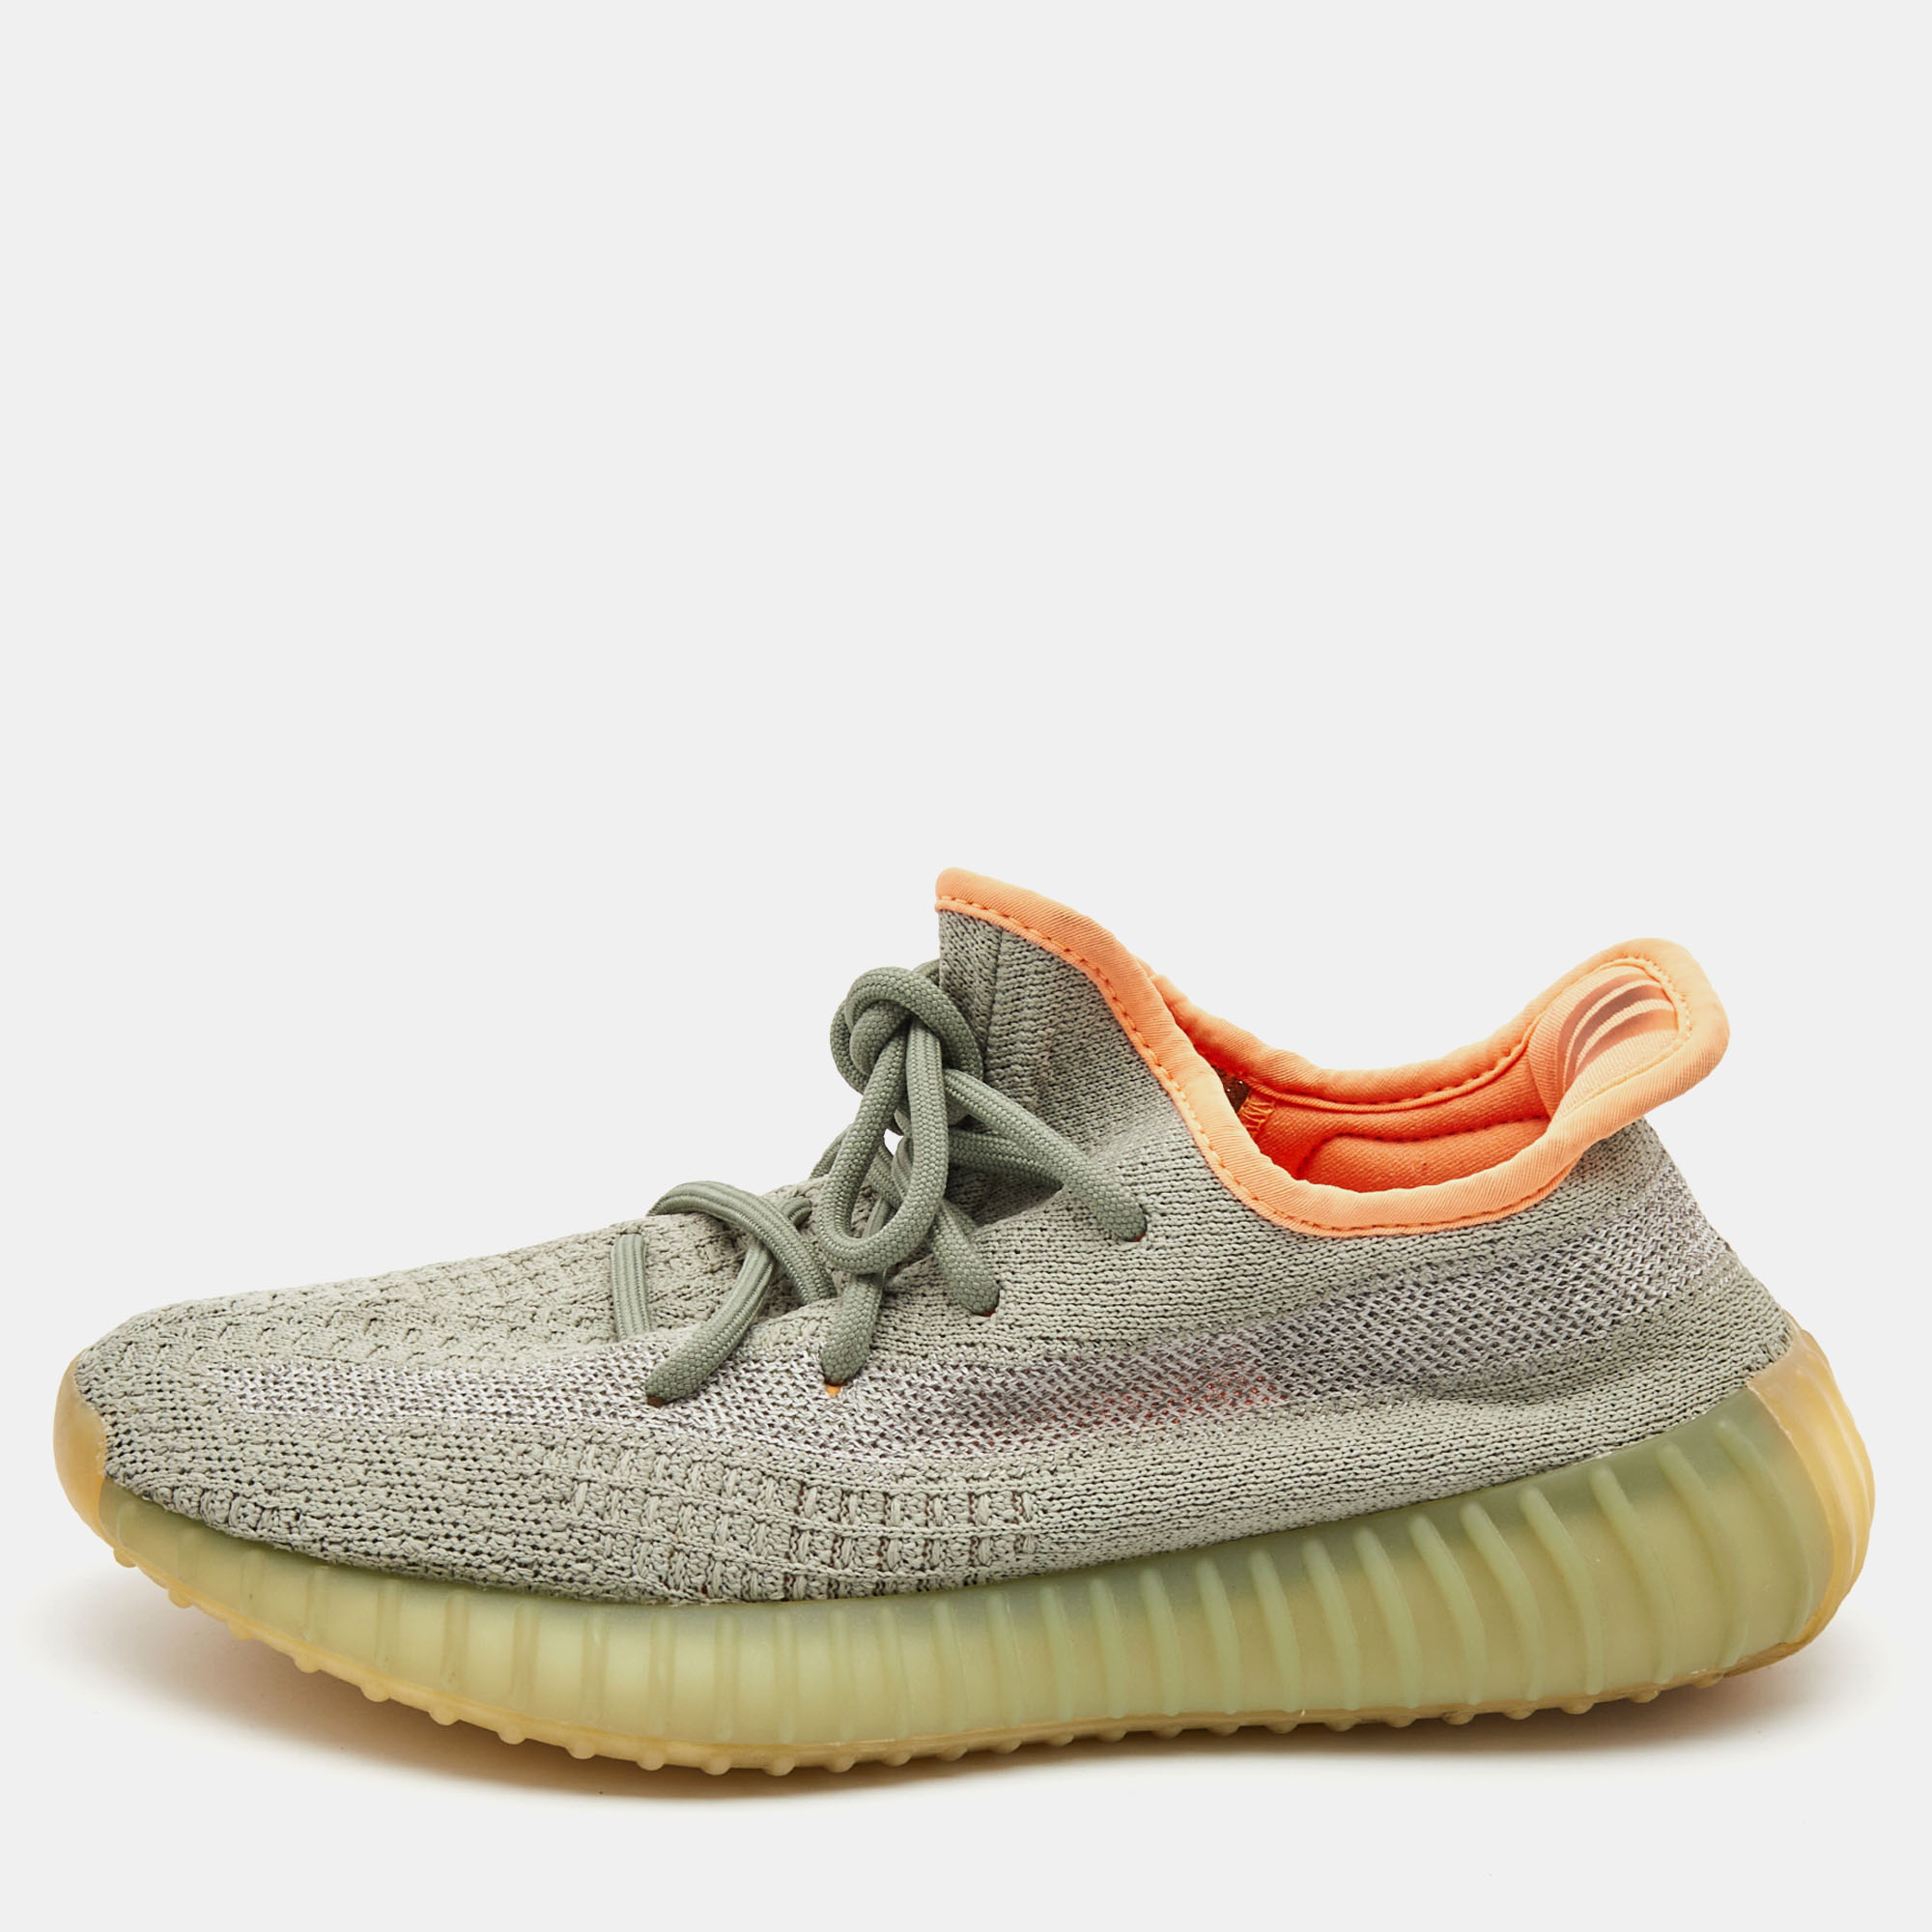 Pre-owned Yeezy X Adidas Green Fabric Boost 350 V2 Desert-sage Sneakers Size 38